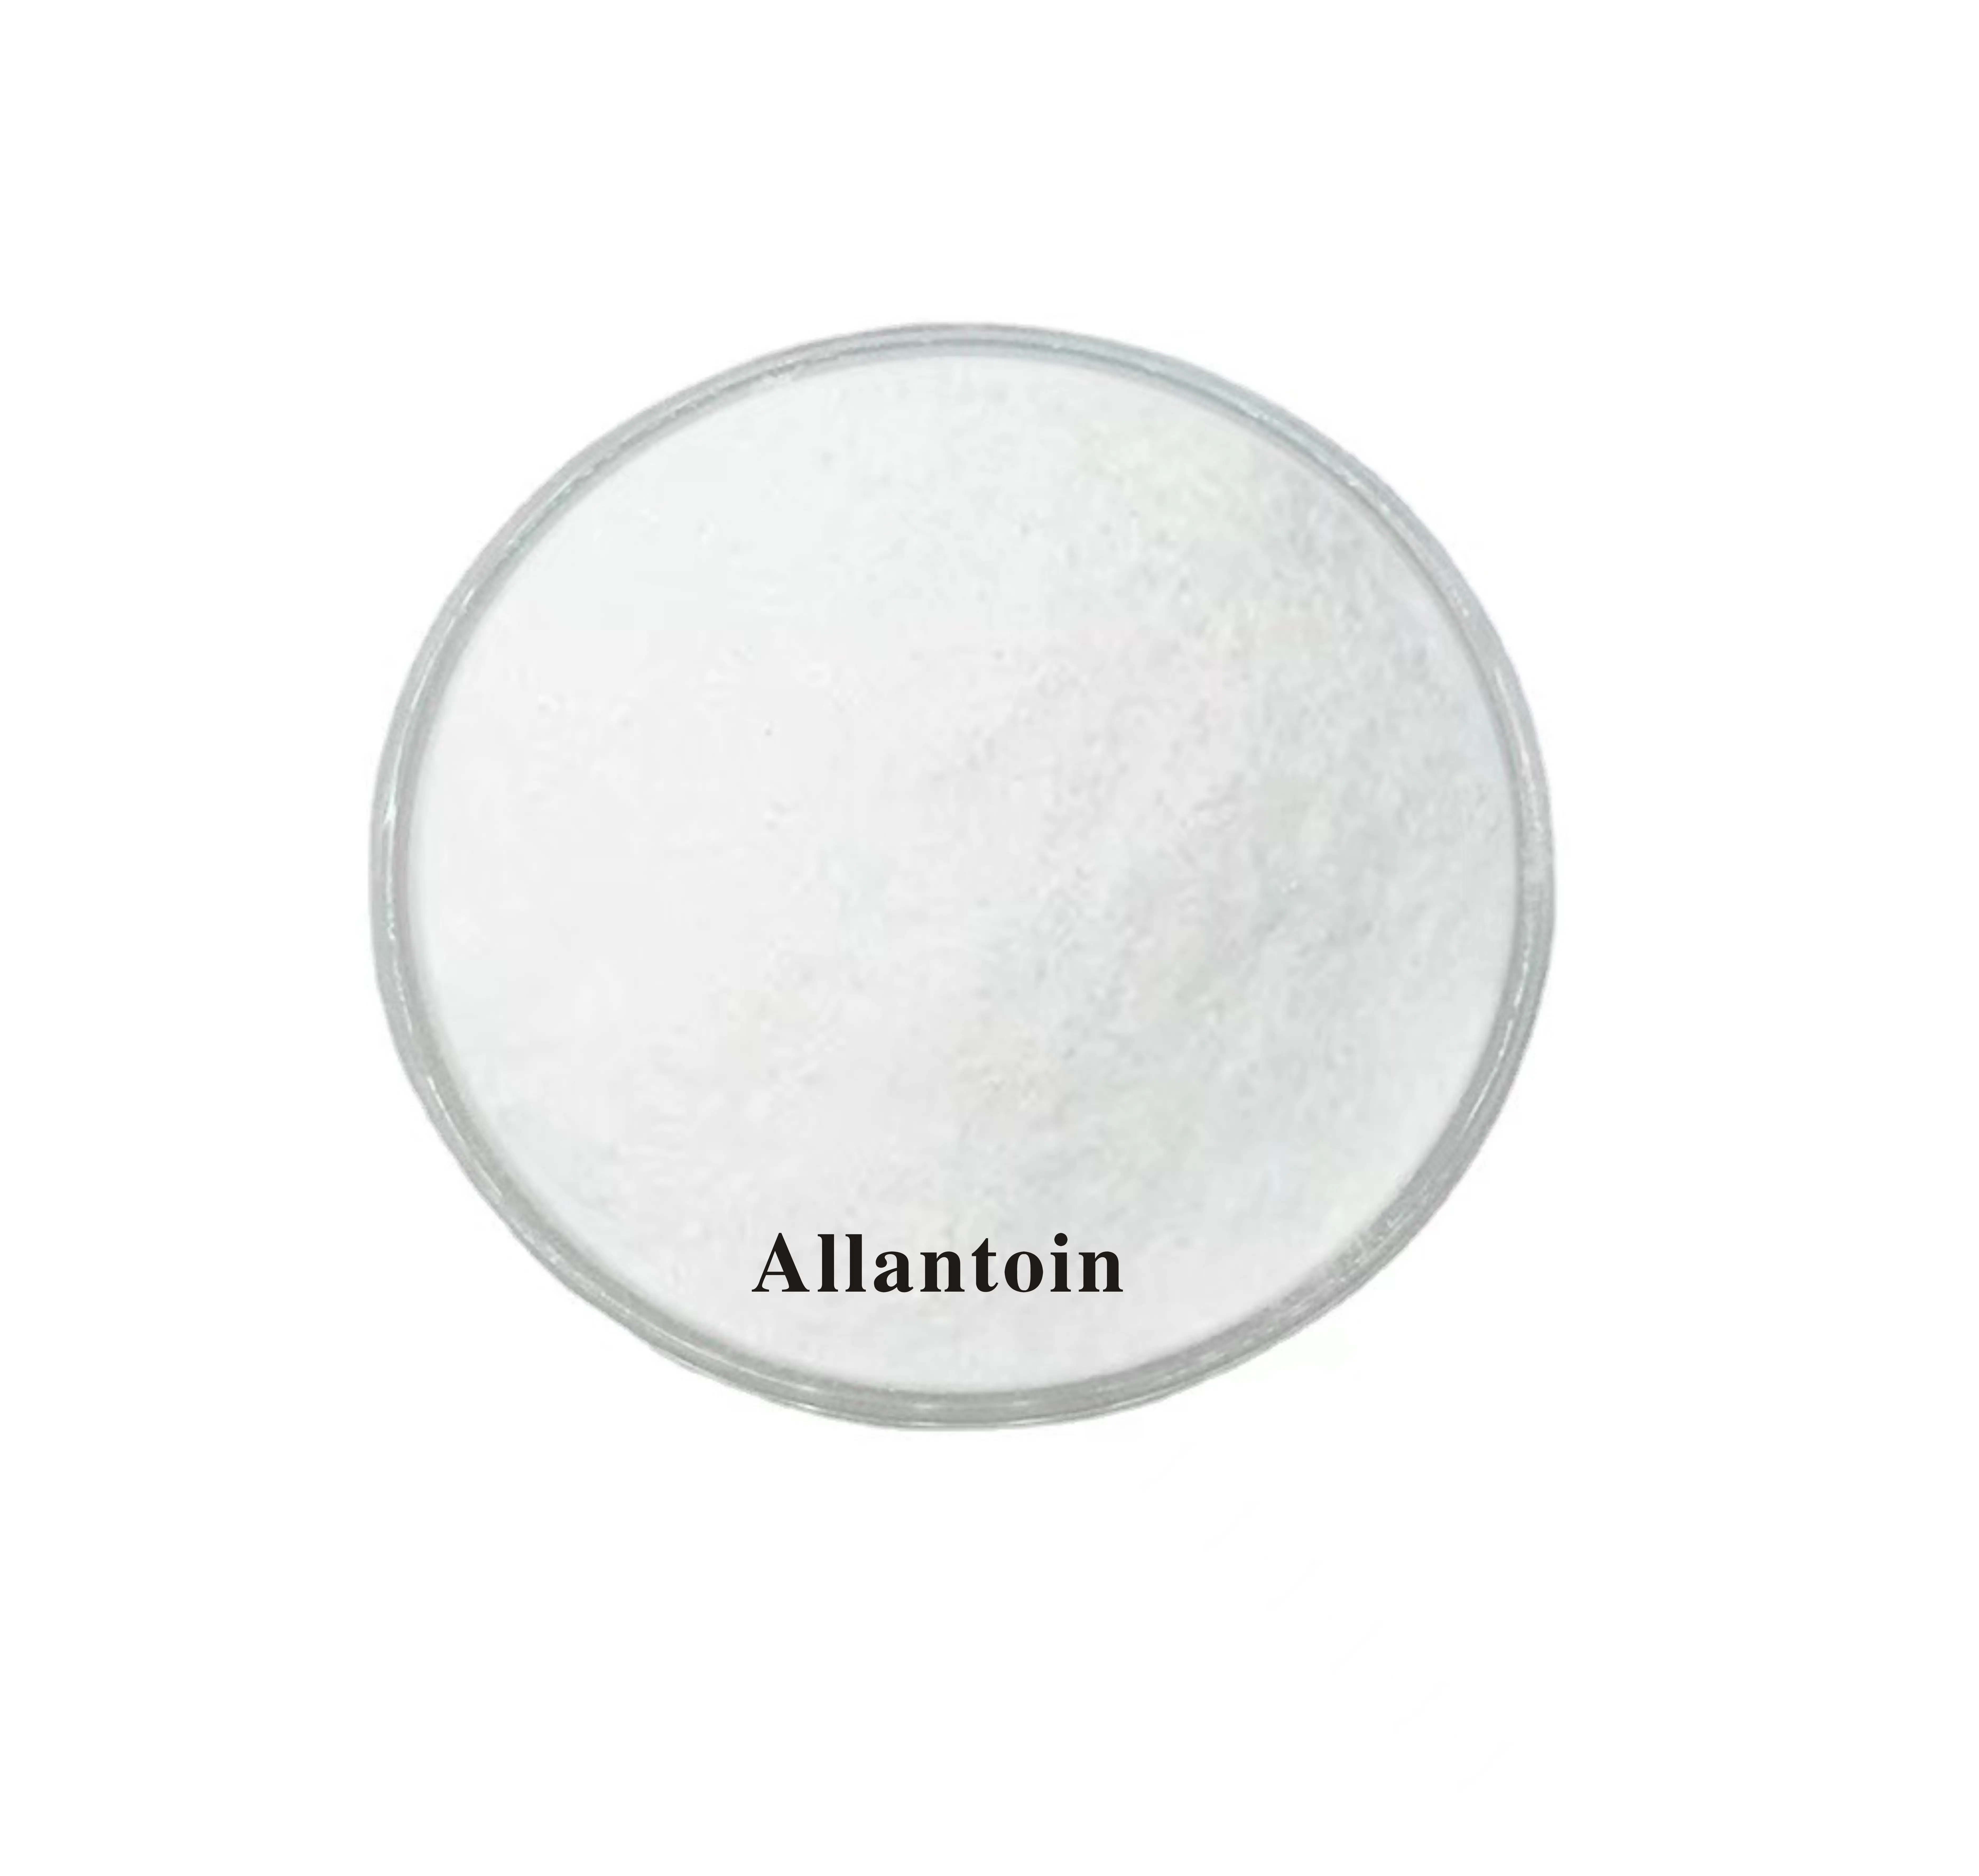 Best Price 98% allantoin powder CAS 97-59-6 cosmetic grade moisturizer ingredients for skin care personal care